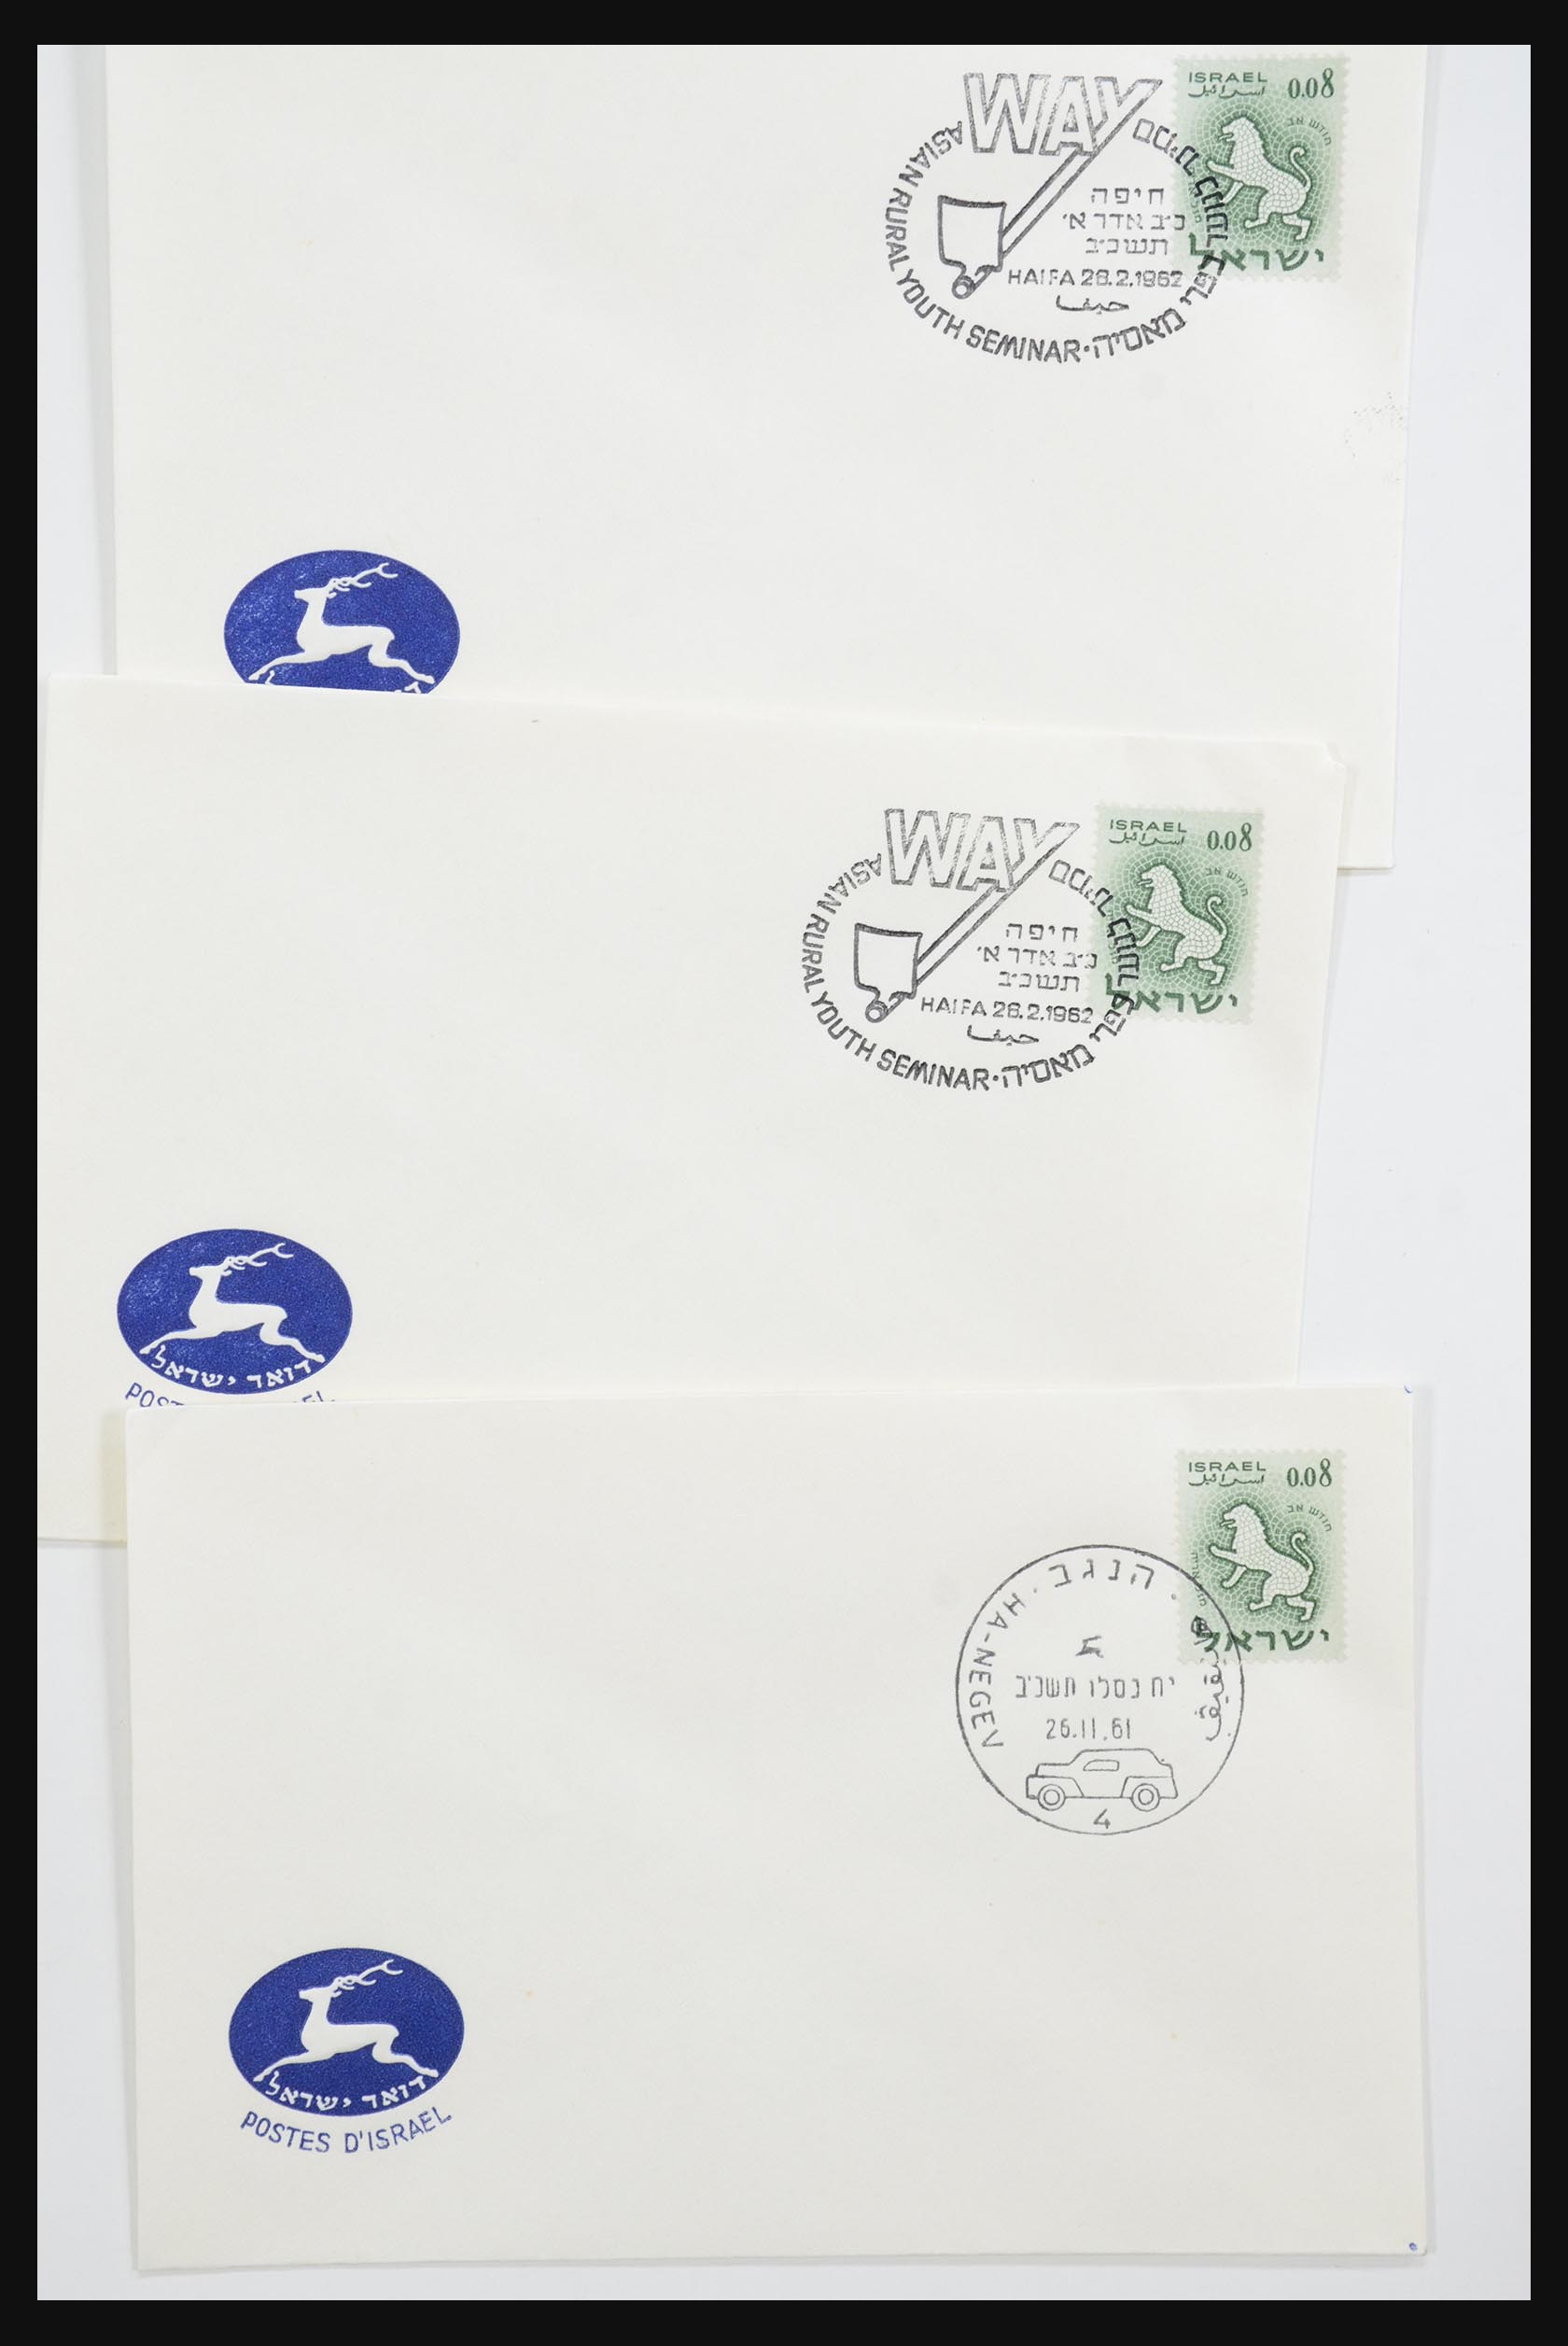 31924 047 - 31924 Israel first day cover collection 1957-2003.